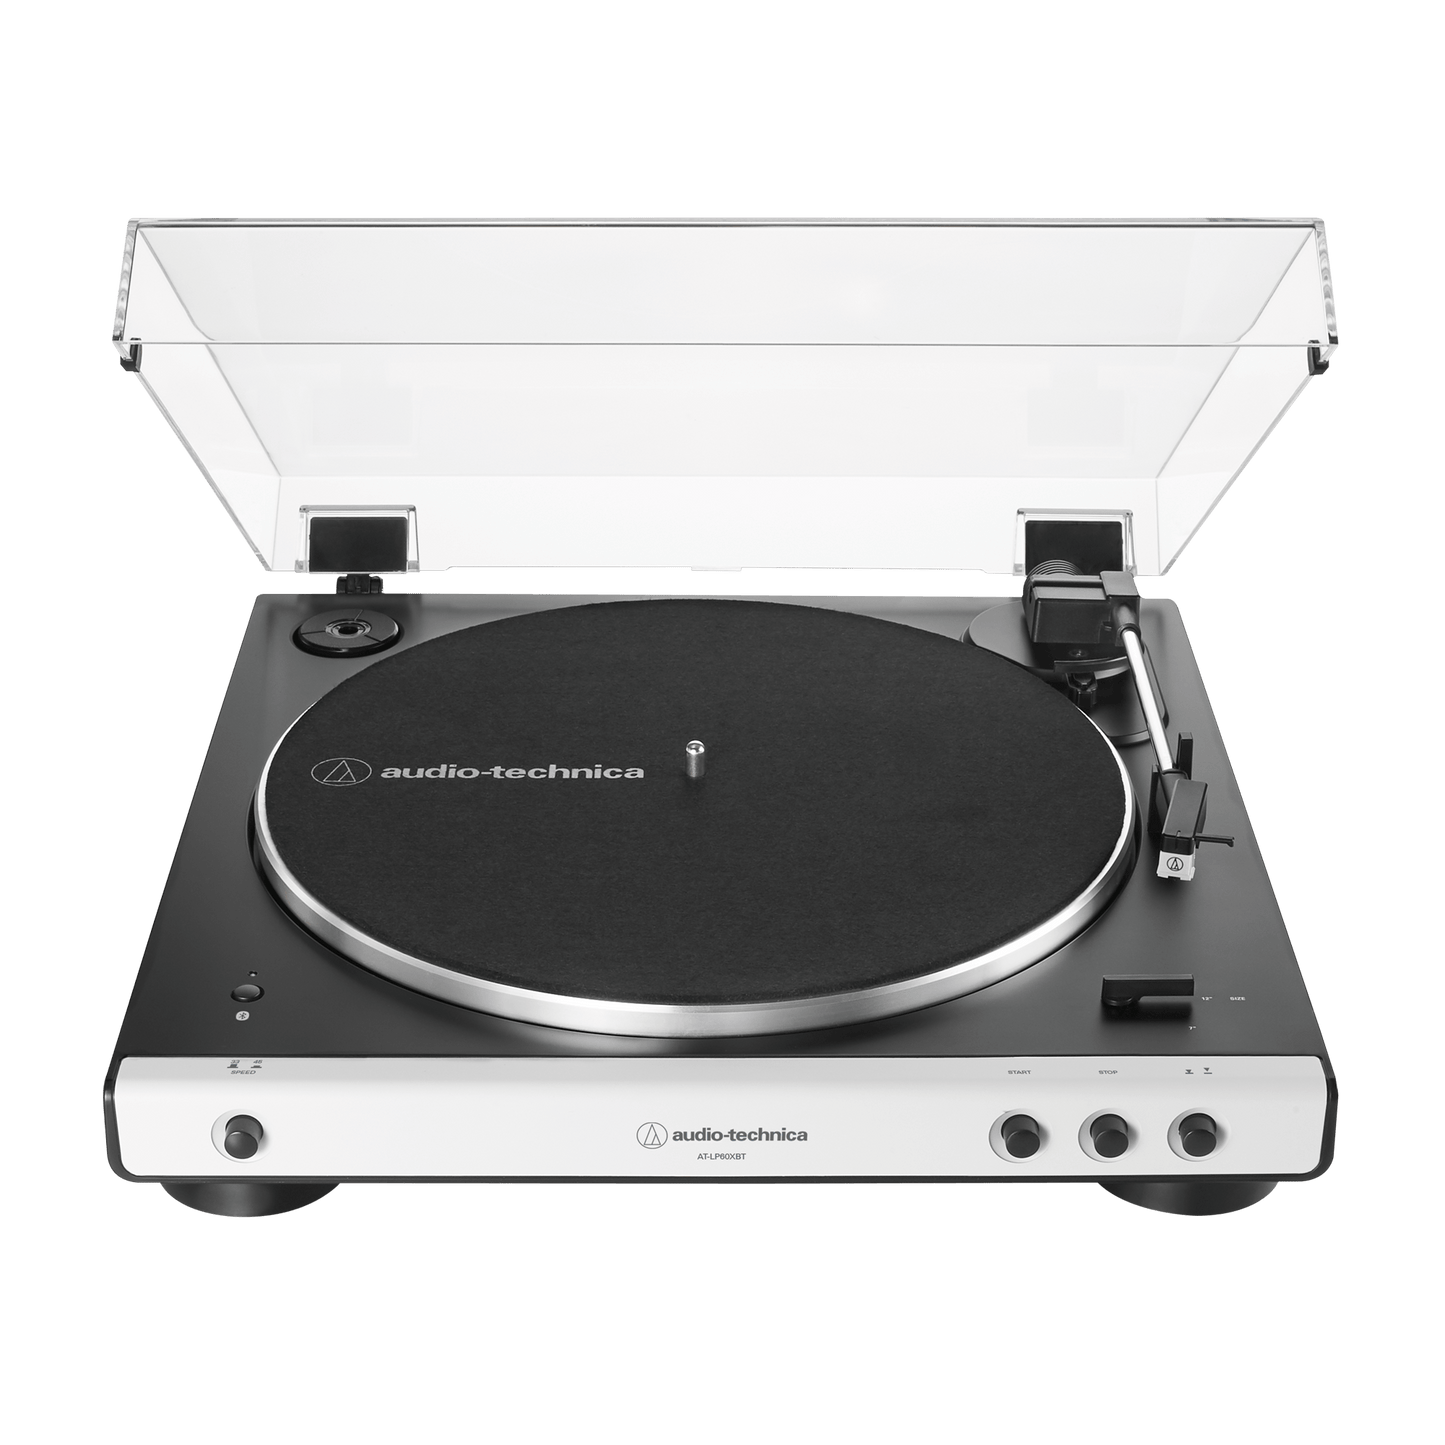 Audiotechnica LP60xBT Bluetooth Automatic turntable